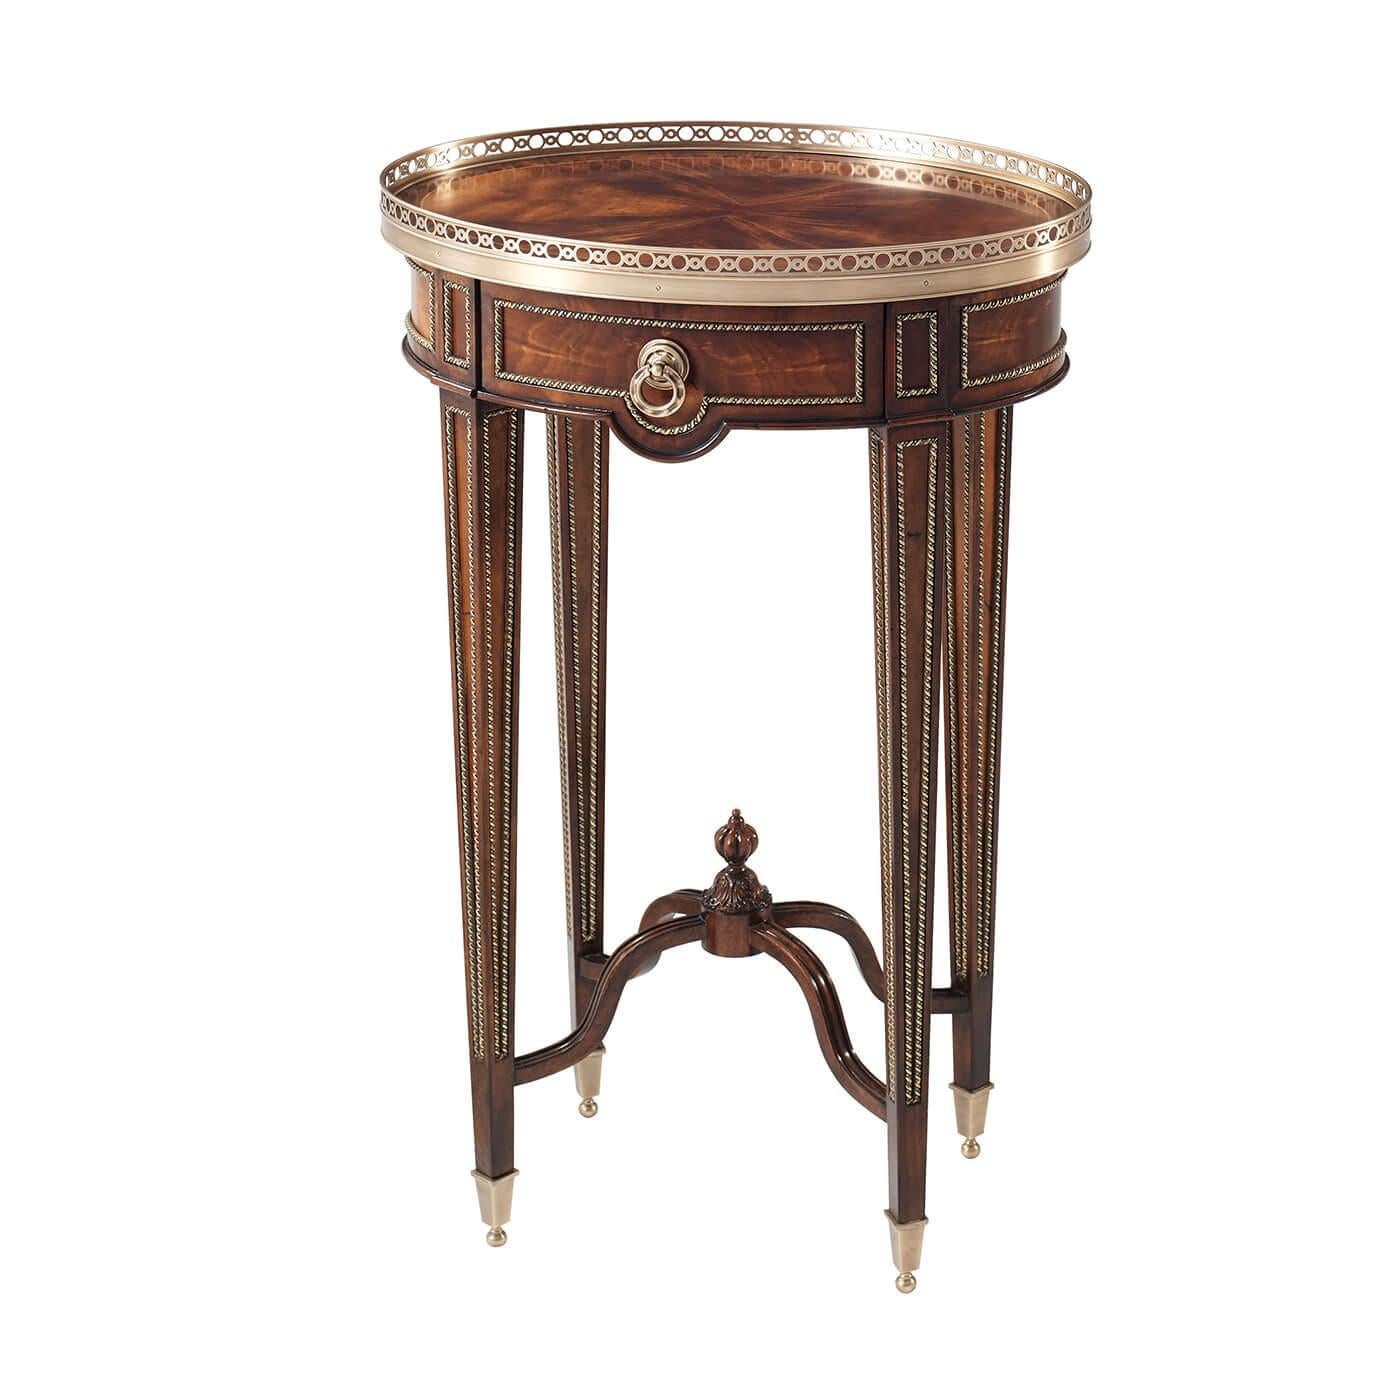 A French Louis XVI style mahogany oval end table with fine brass mounts, the brass galleried oval top above a frieze drawer on paneled square tapering legs with brass cappings joined by an 'X' stretcher.

Dimensions: 19.5